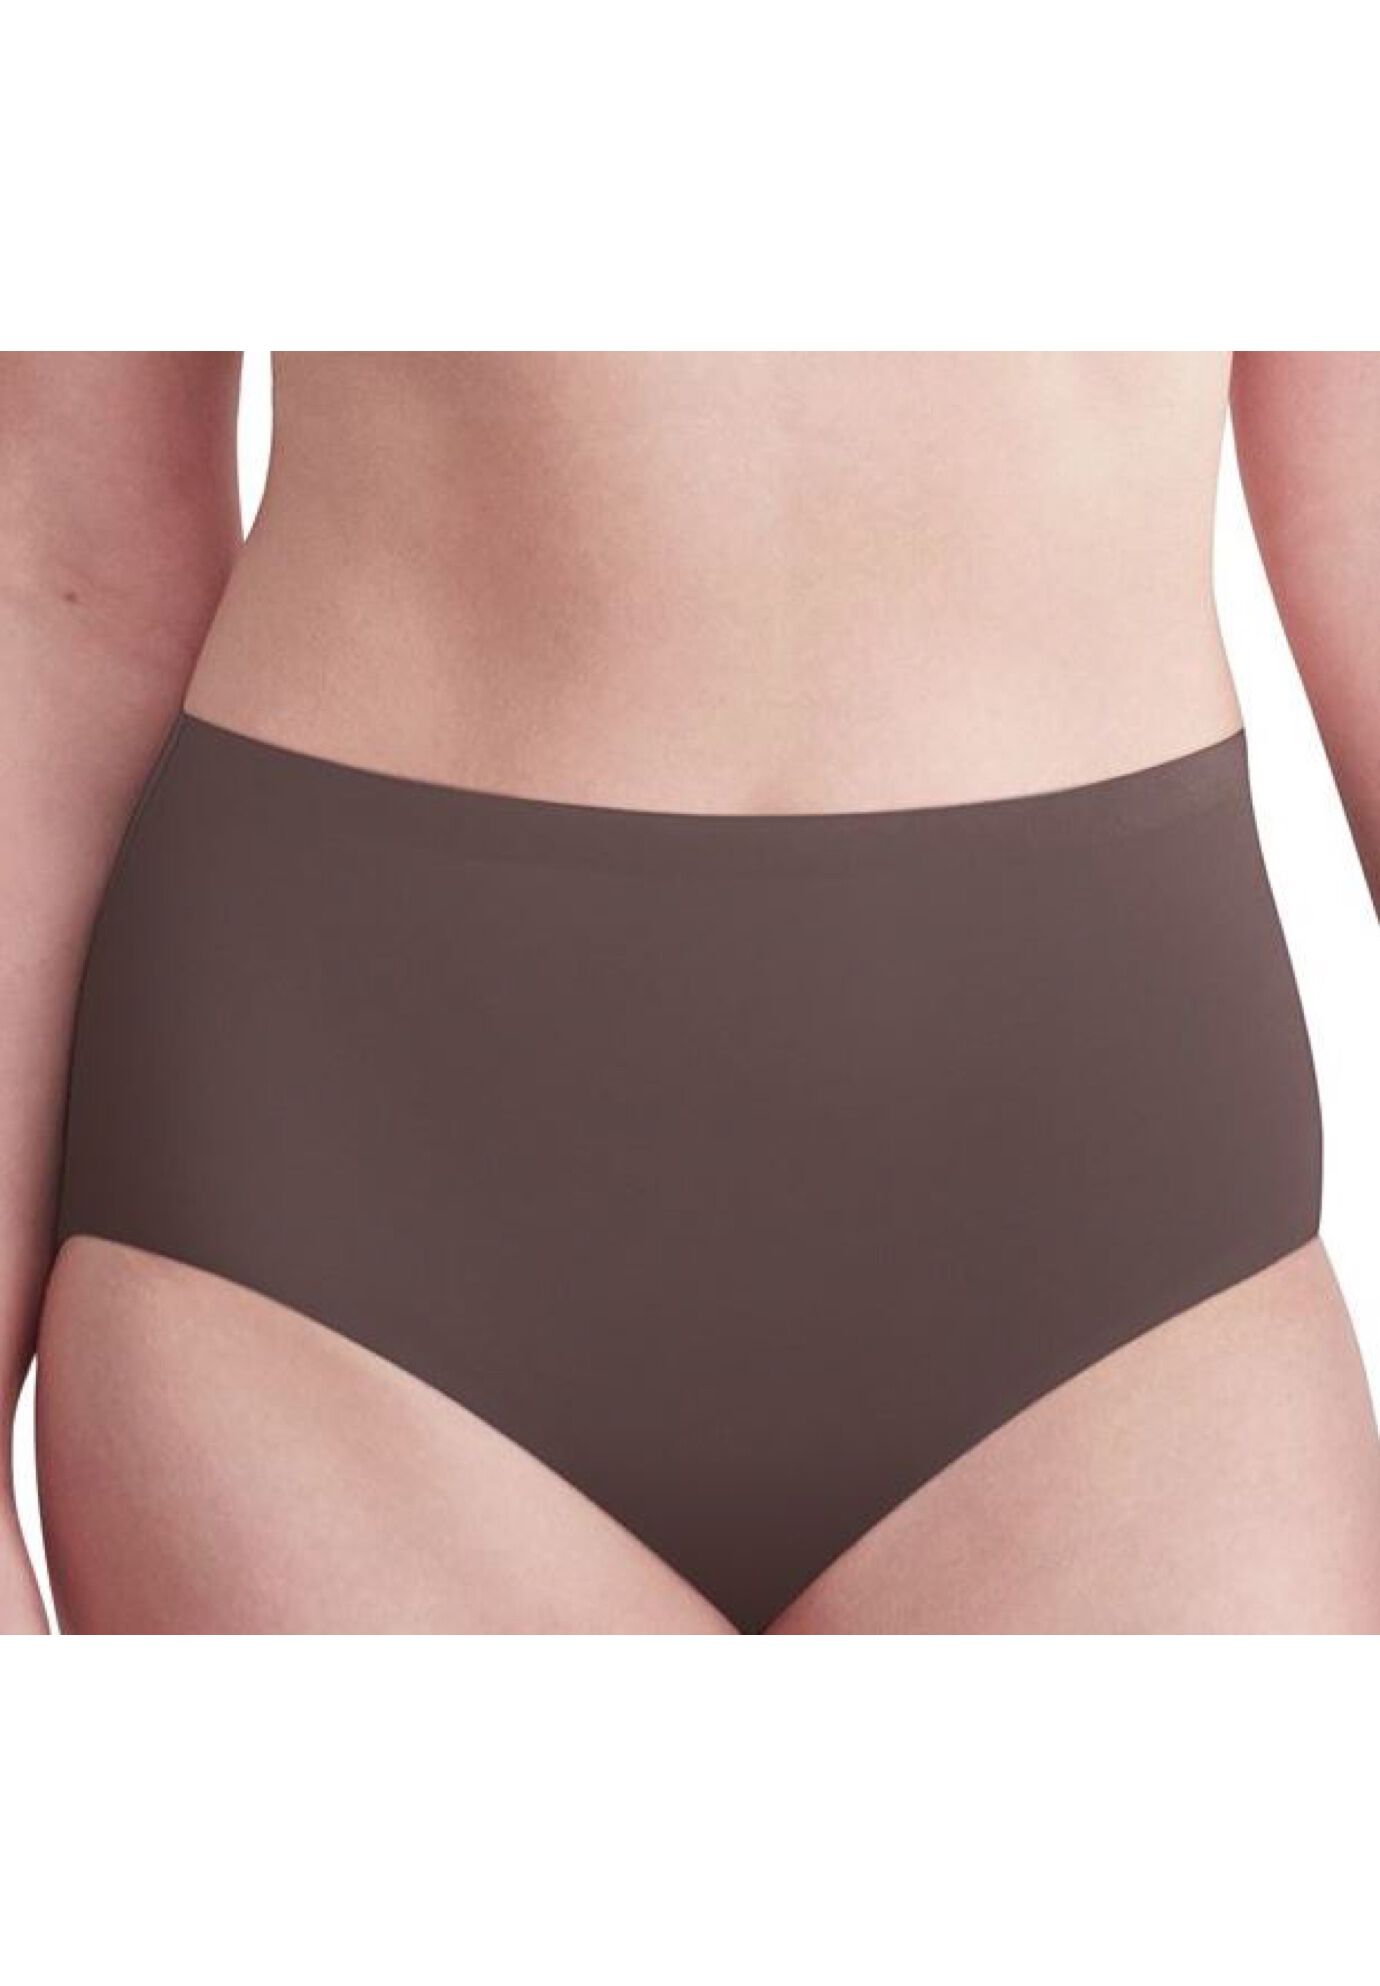 Plus Size Women's Comfort Revolution EasyLite&#8482; Brief by Bali in Sparrow Brown (Size 9)